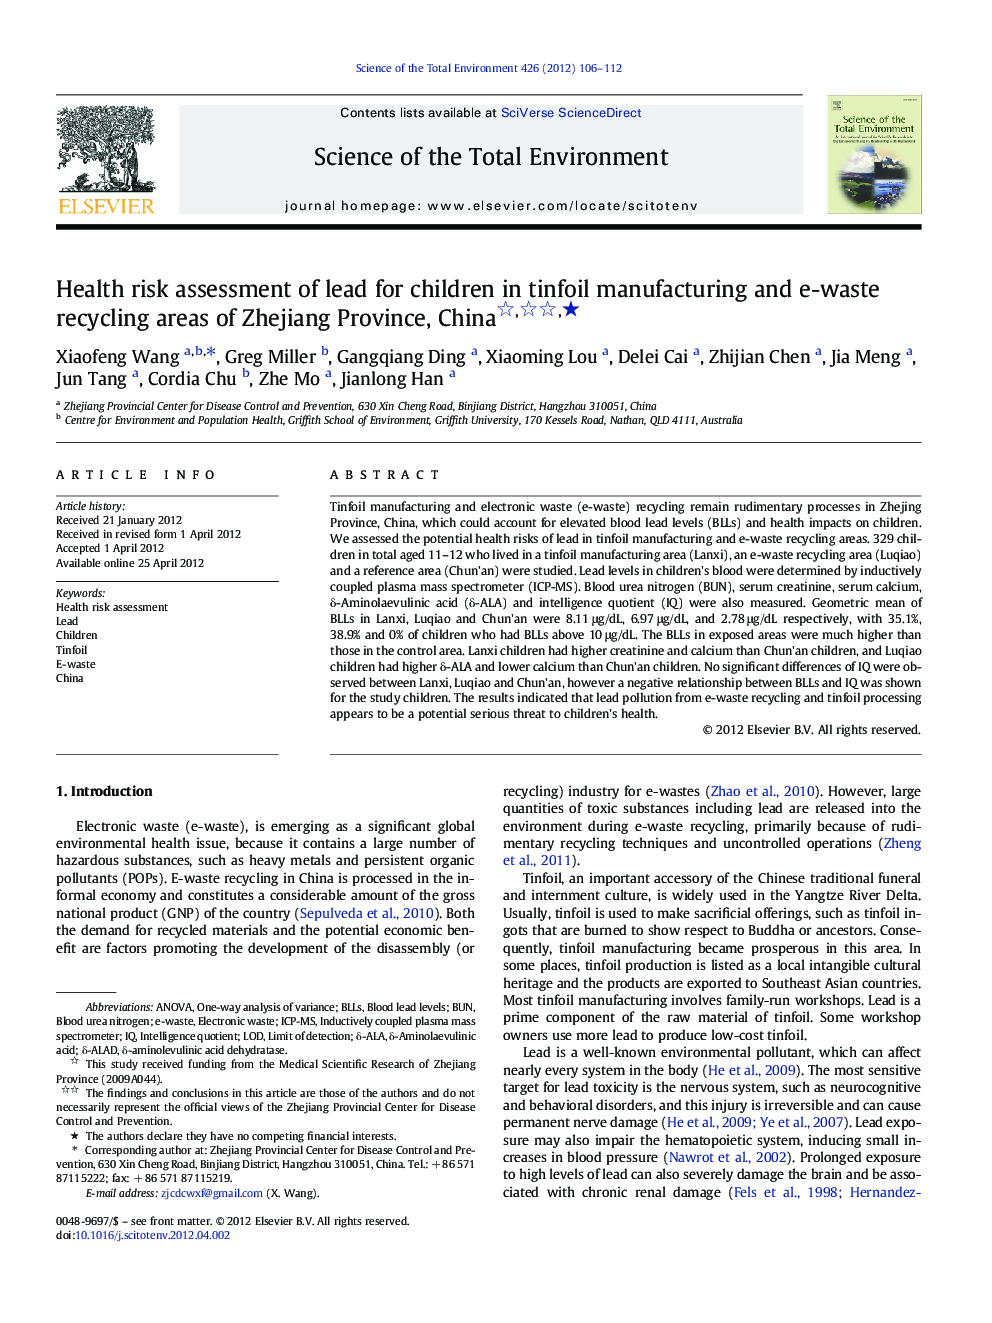 Health risk assessment of lead for children in tinfoil manufacturing and e-waste recycling areas of Zhejiang Province, China ★